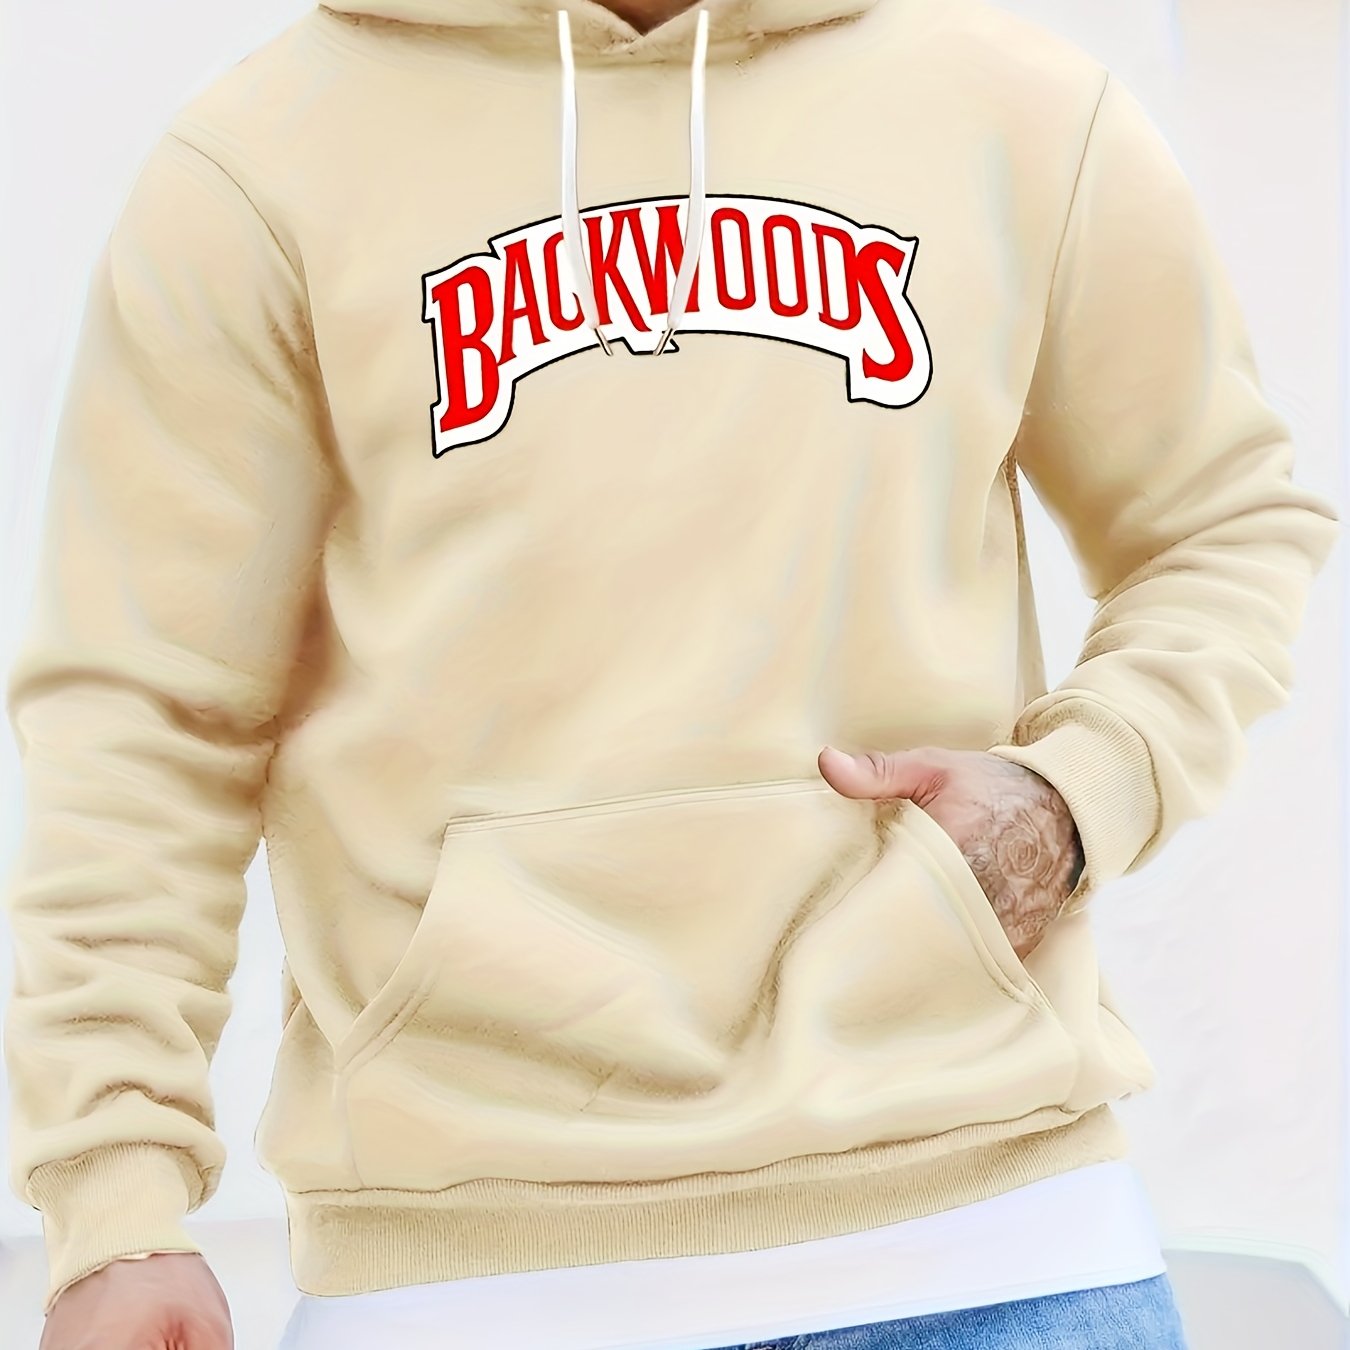 BACKWOODS Print Hoodie, Cool Hooded Pullover For Men, Men's Casual Graphic Design Slightly Flex Streetwear Sweatshirt For Spring Fall And Winter, As Gifts